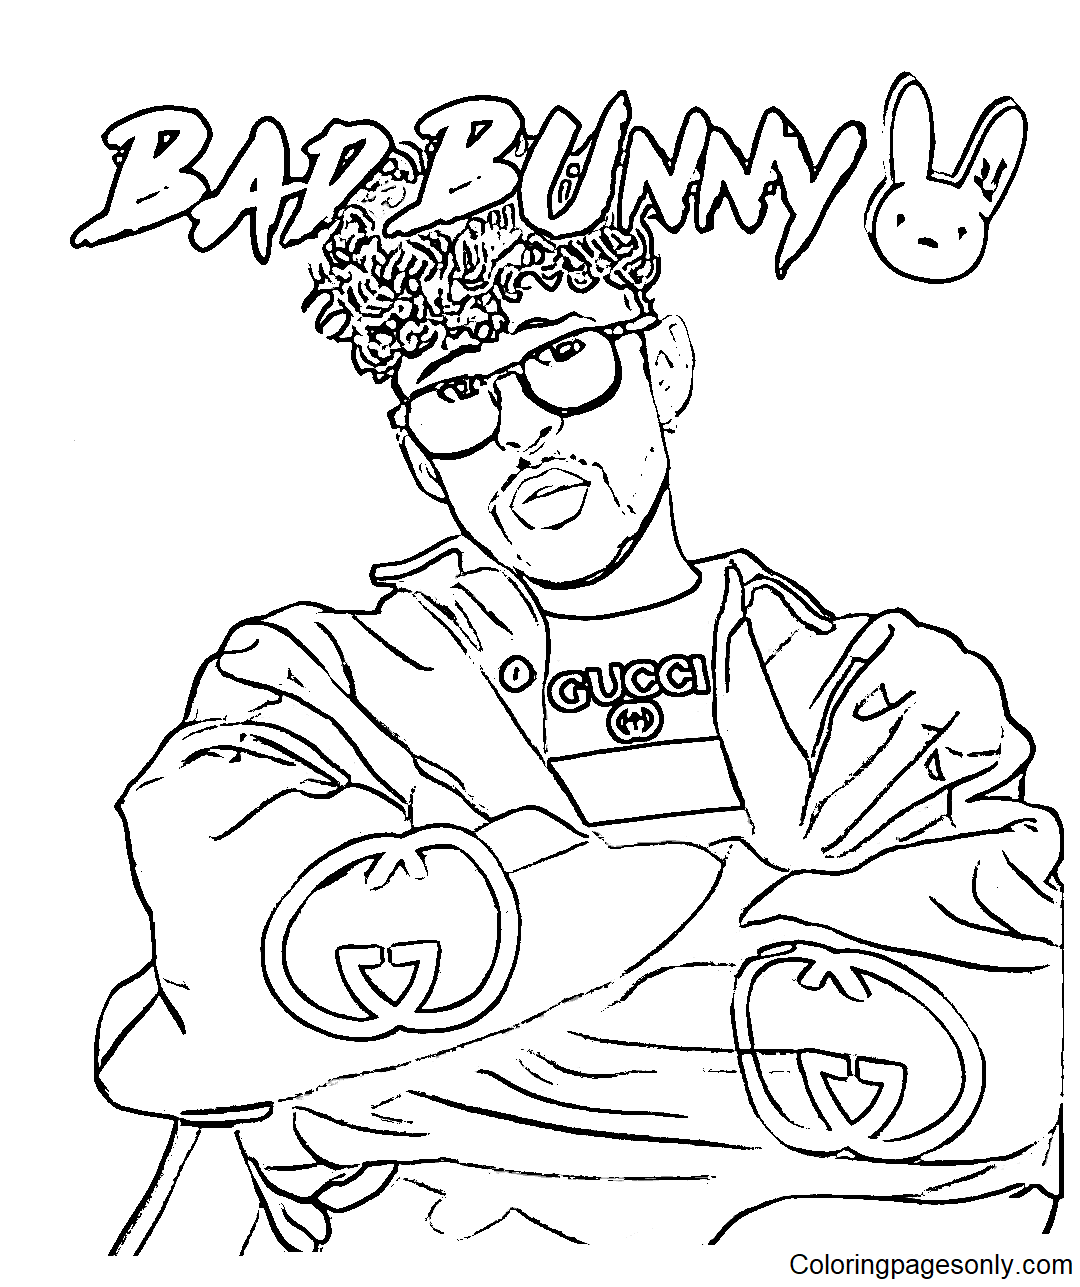 Bad Bunny Rapper Singer Coloring Pages Bad Bunny Coloring Pages